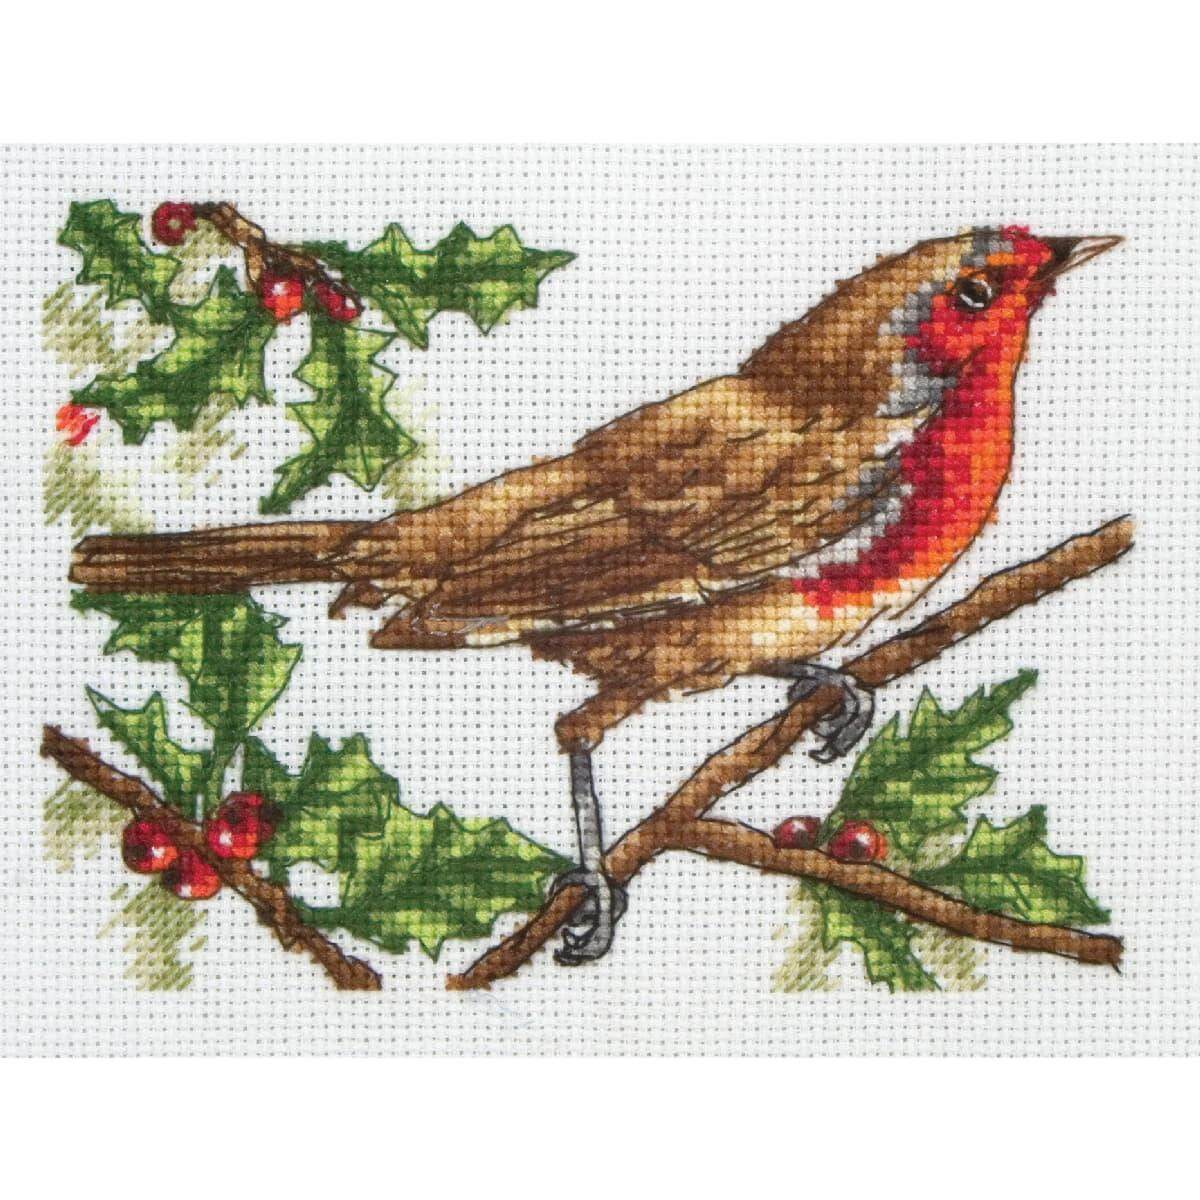 Anchor counted cross stitch kit "Robin",...